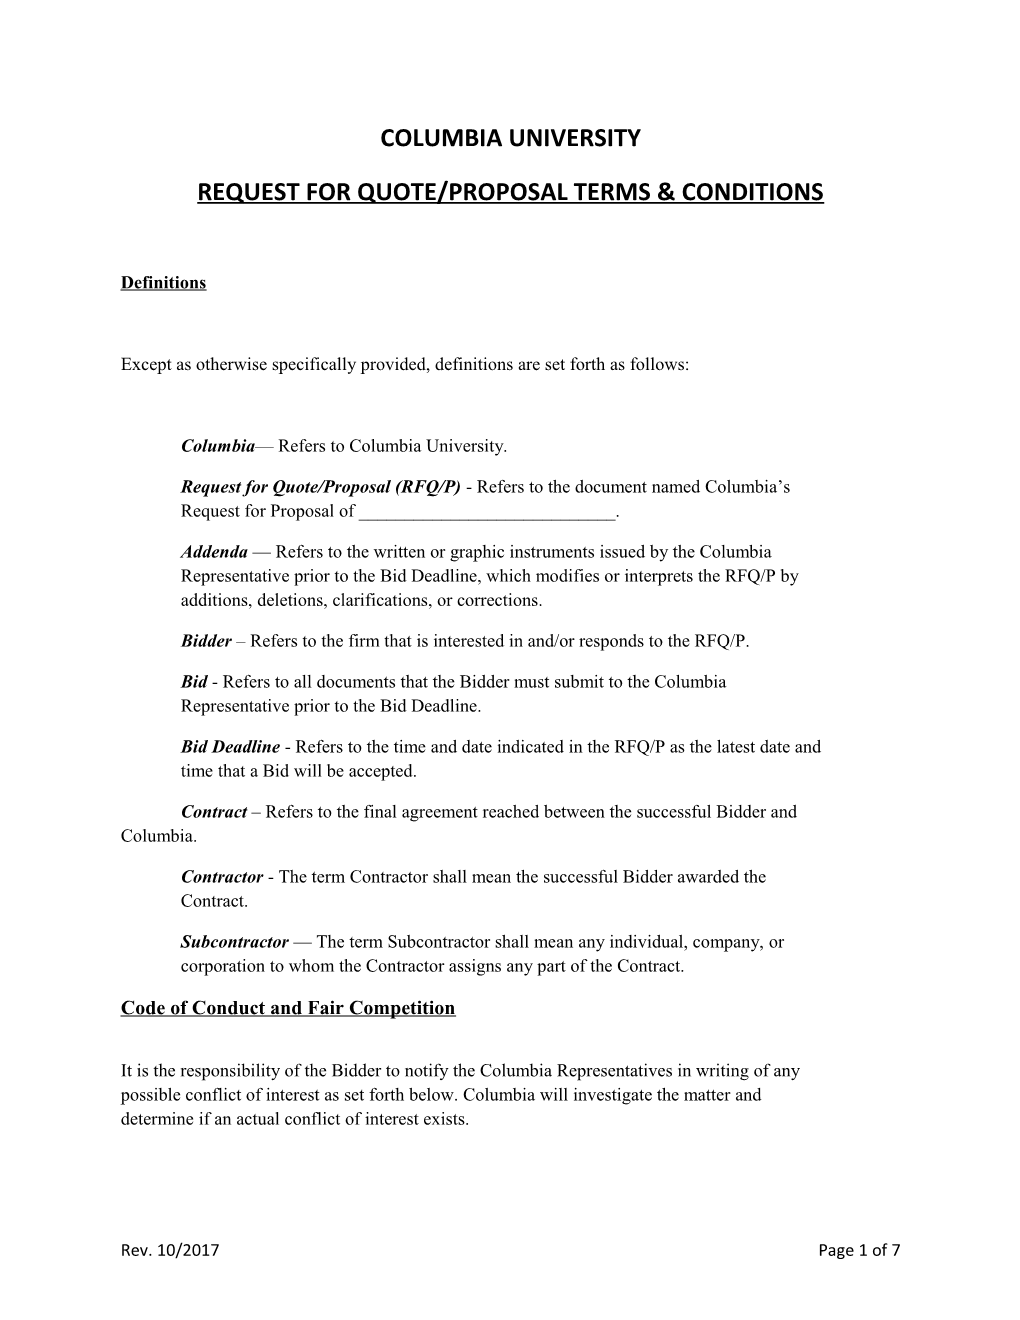 Request for Quote/Proposal Terms & Conditions